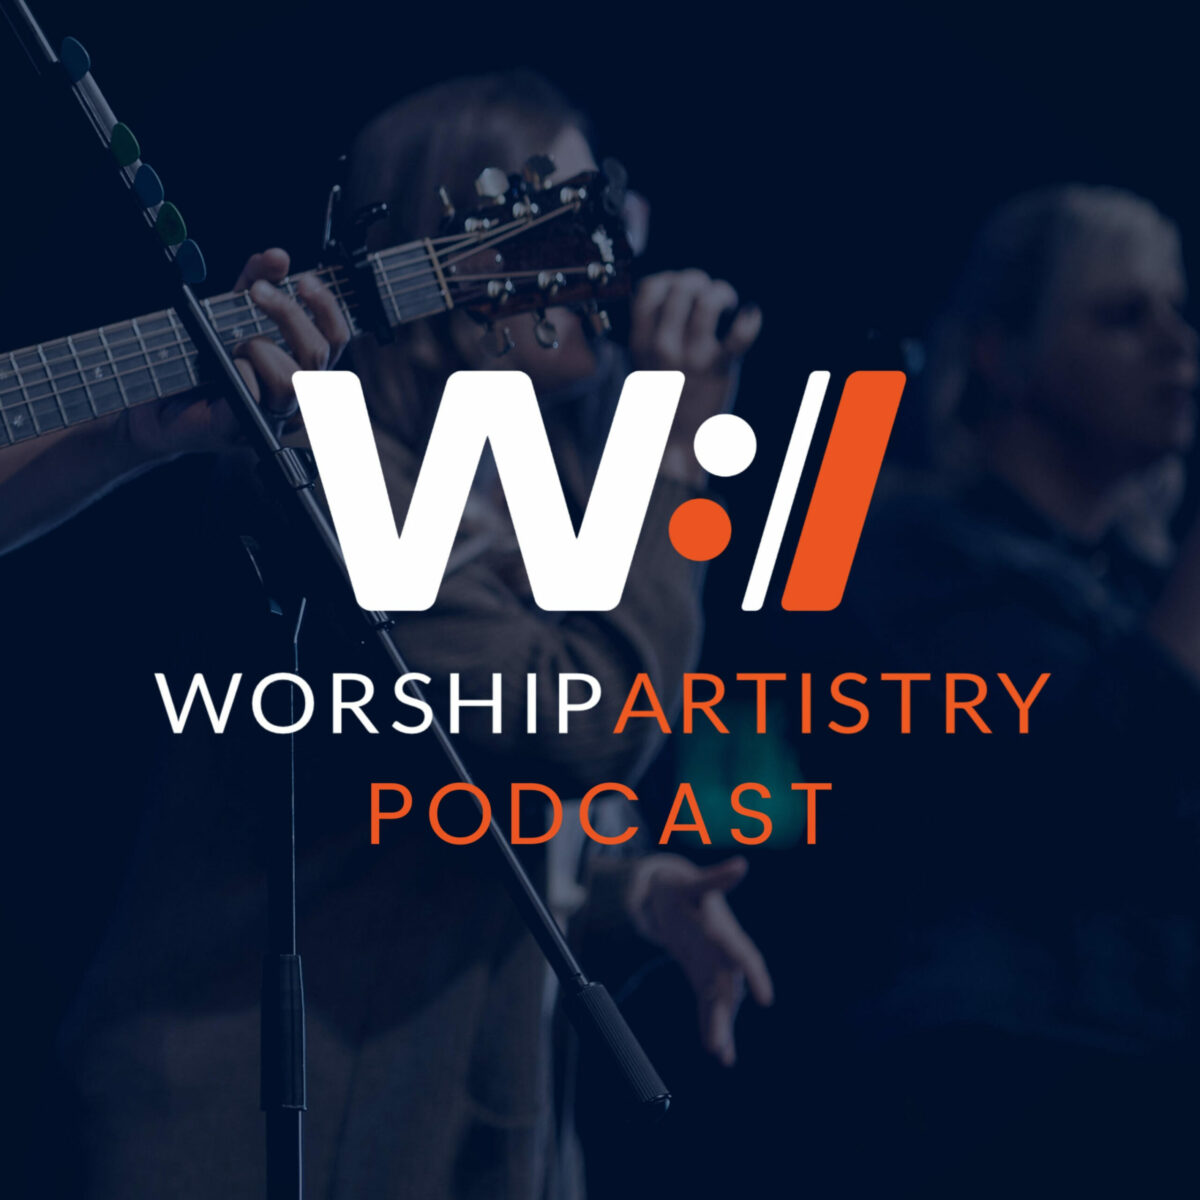 Worship Artistry Podcast Keeping Our Reverence in Worshipping Jesus with Mark Alan Schoolmeesters